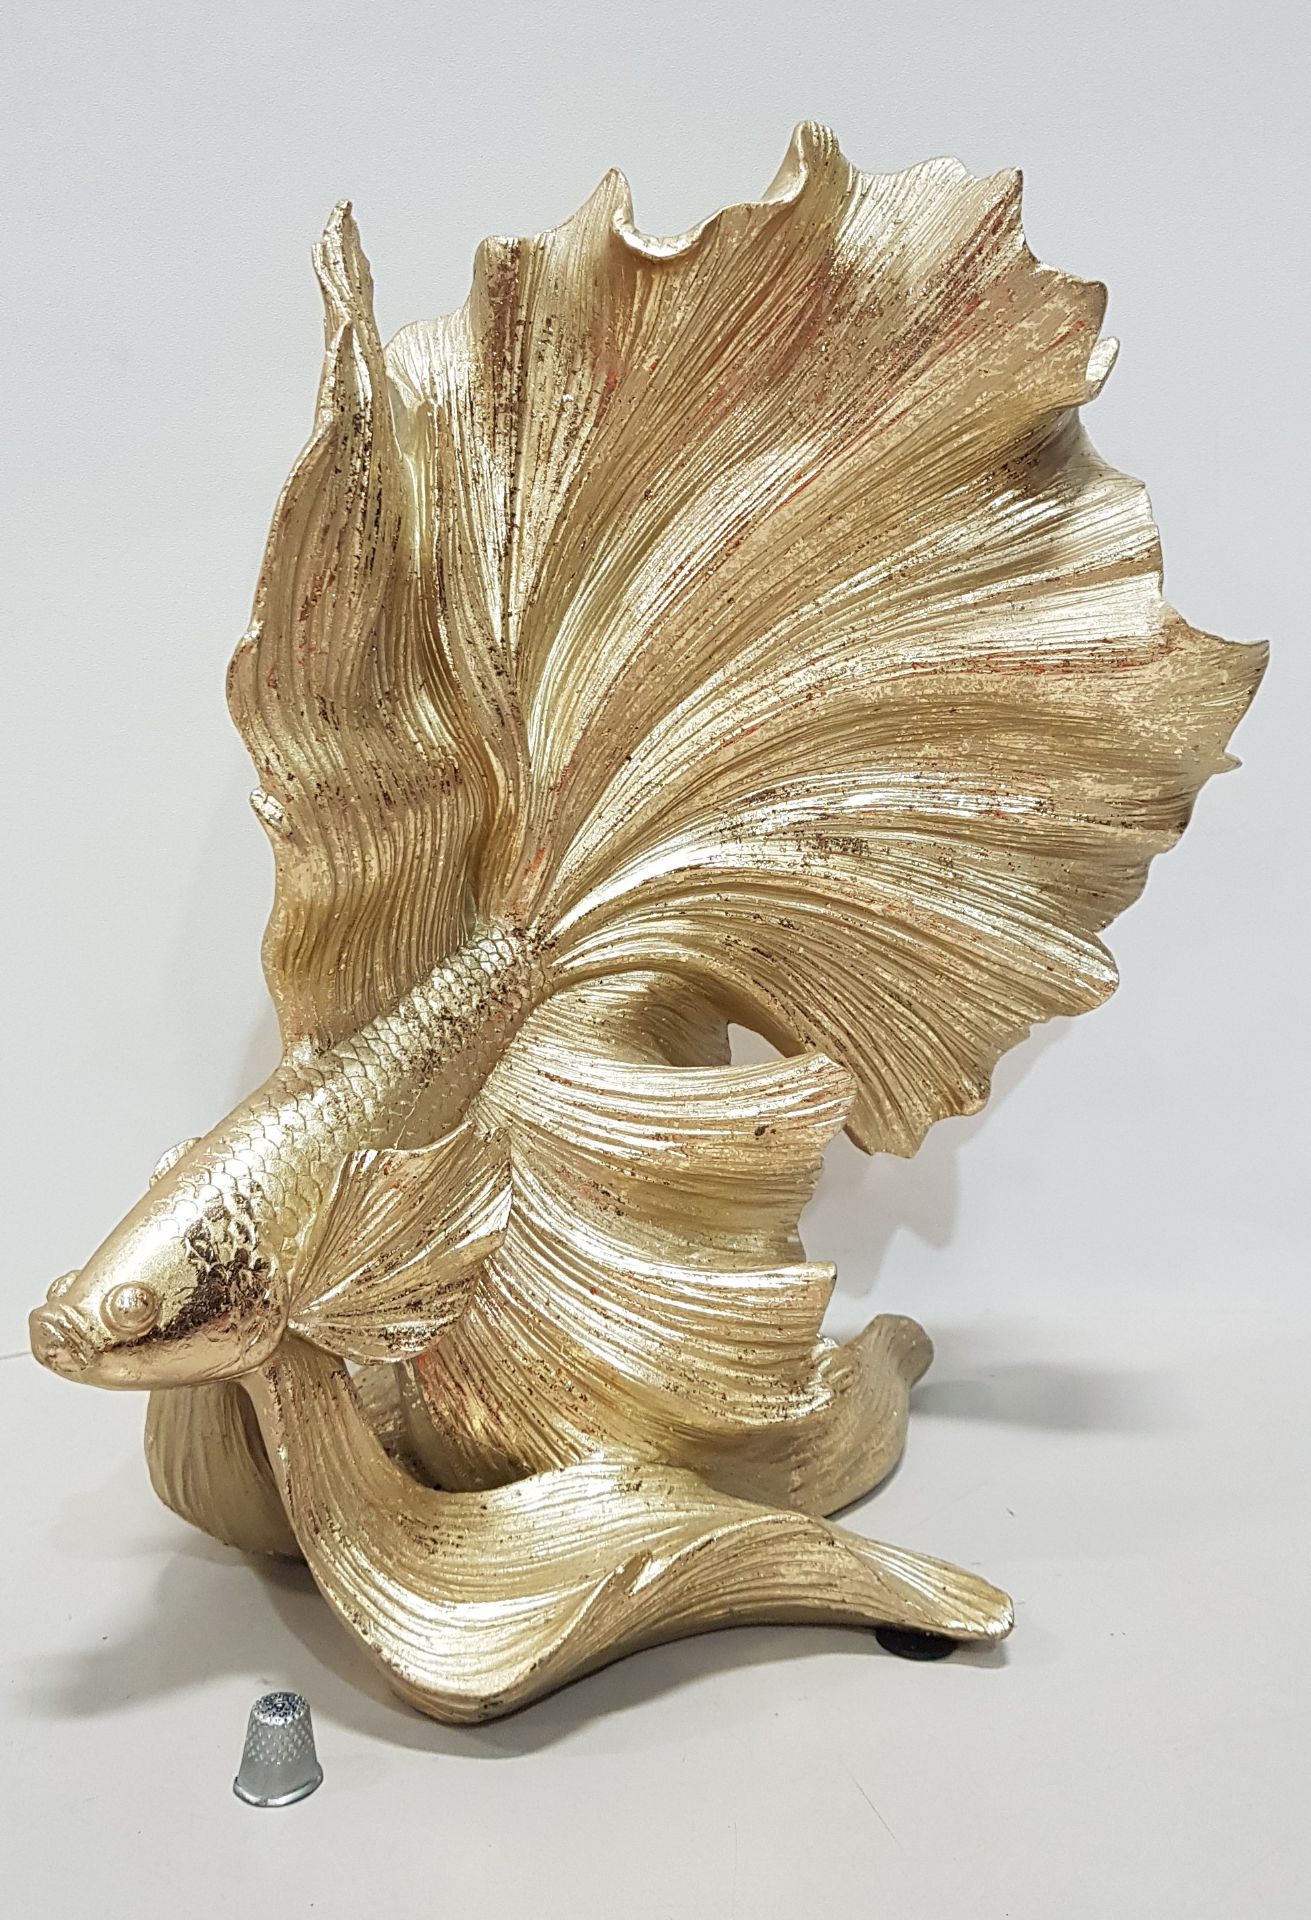 12 X BRAND NEW THE VINTAGE GARDEN ROOM GOLD EFFECT DECORATIVE FISH SIZE 38CM H X 33CM W IN 6 BOXES